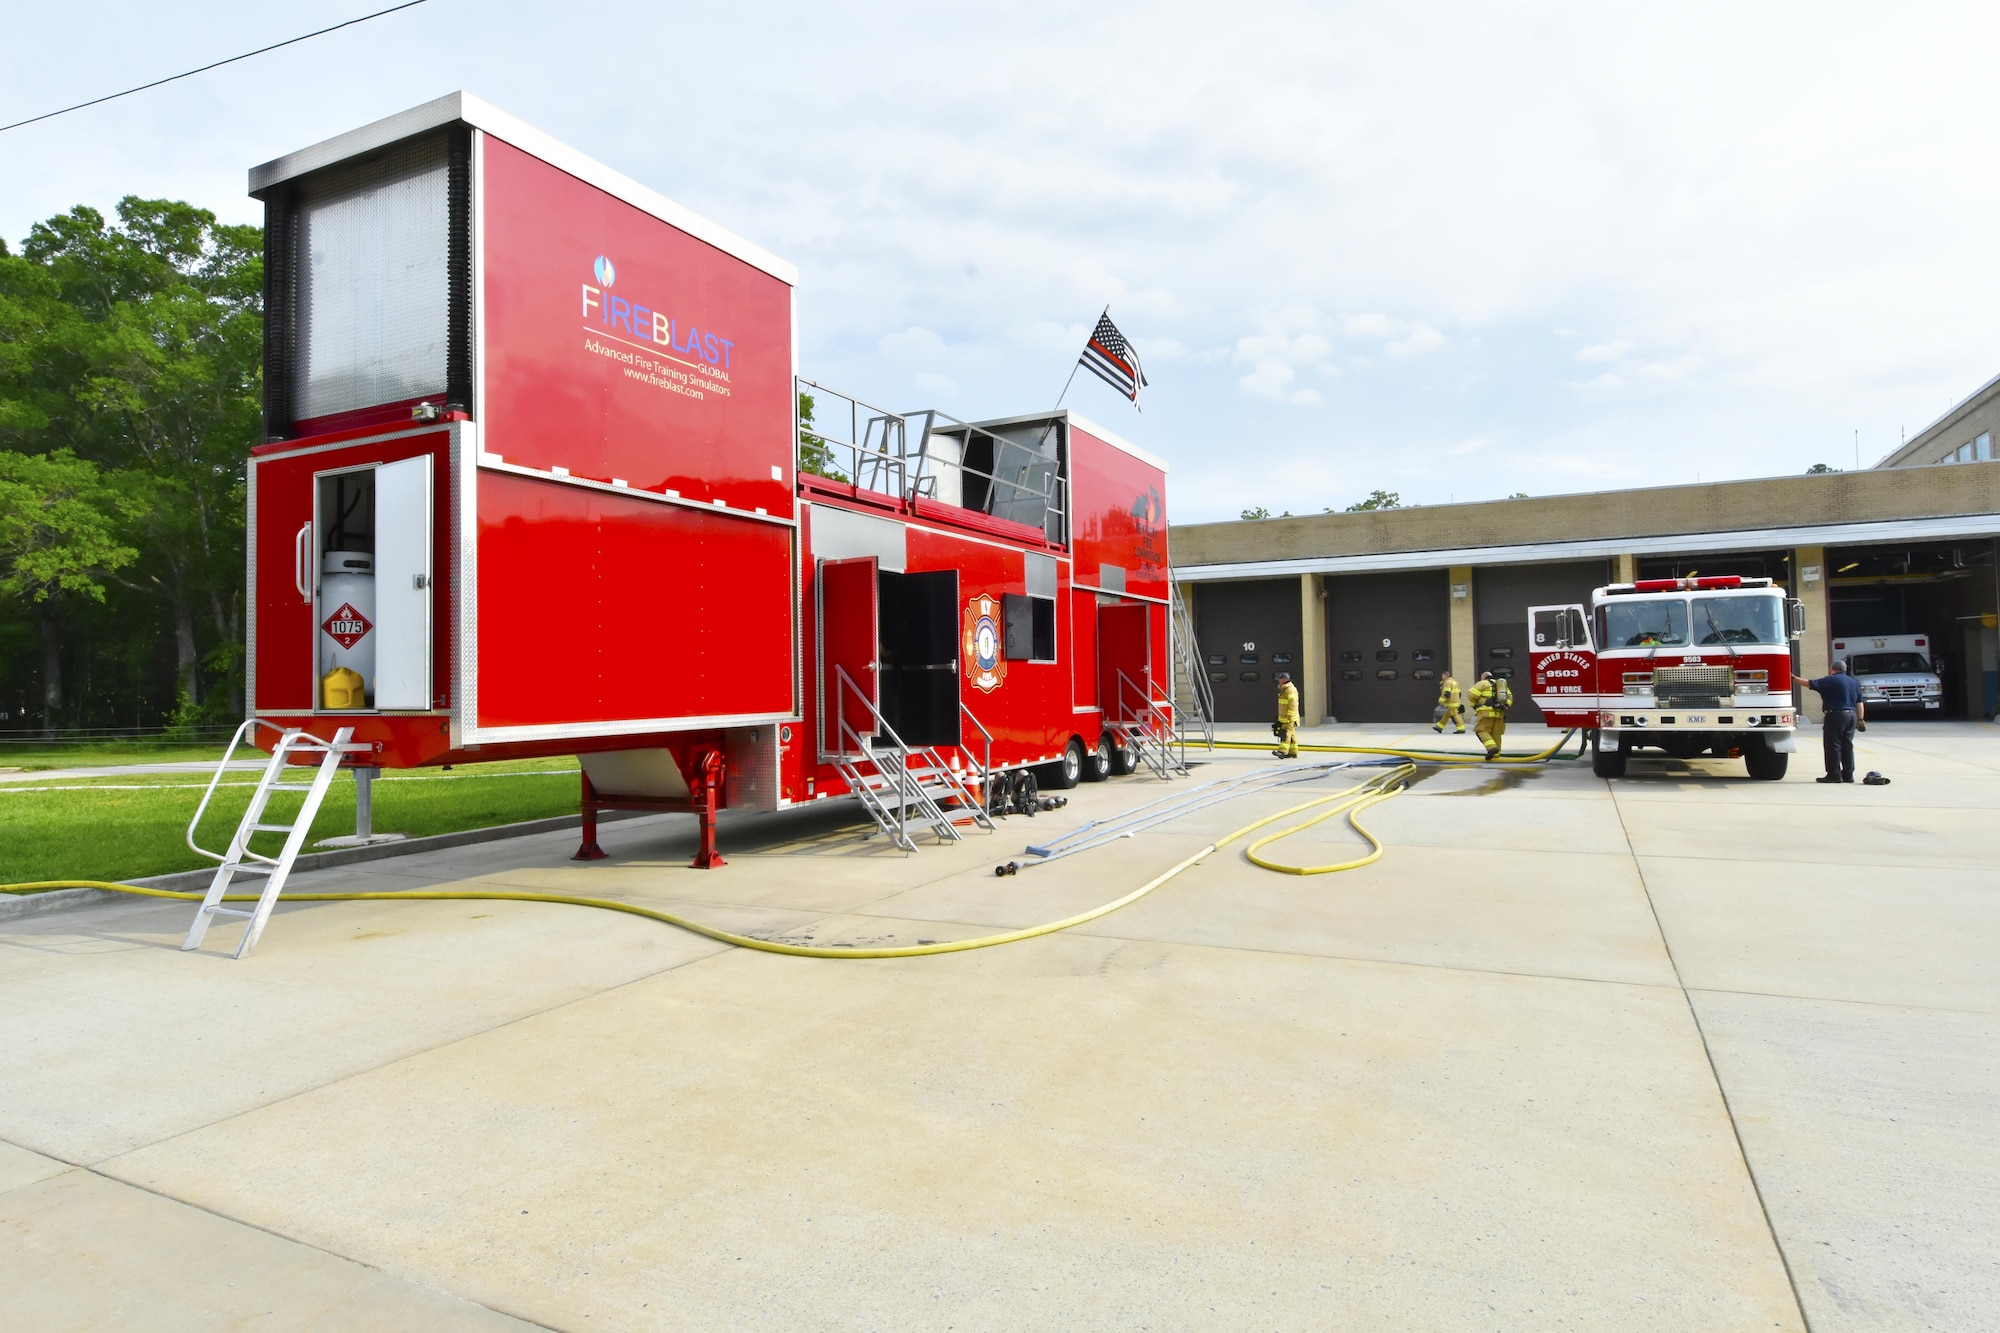 During live fire training at Arnold Air Force Base on May 9-11, the Kentucky Fire Commission mobile live fire rescue structure shown in this photo was used to simulate real life fire scenarios for Arnold firefighters. (U.S. Air Force photo/Rick Goodfriend)